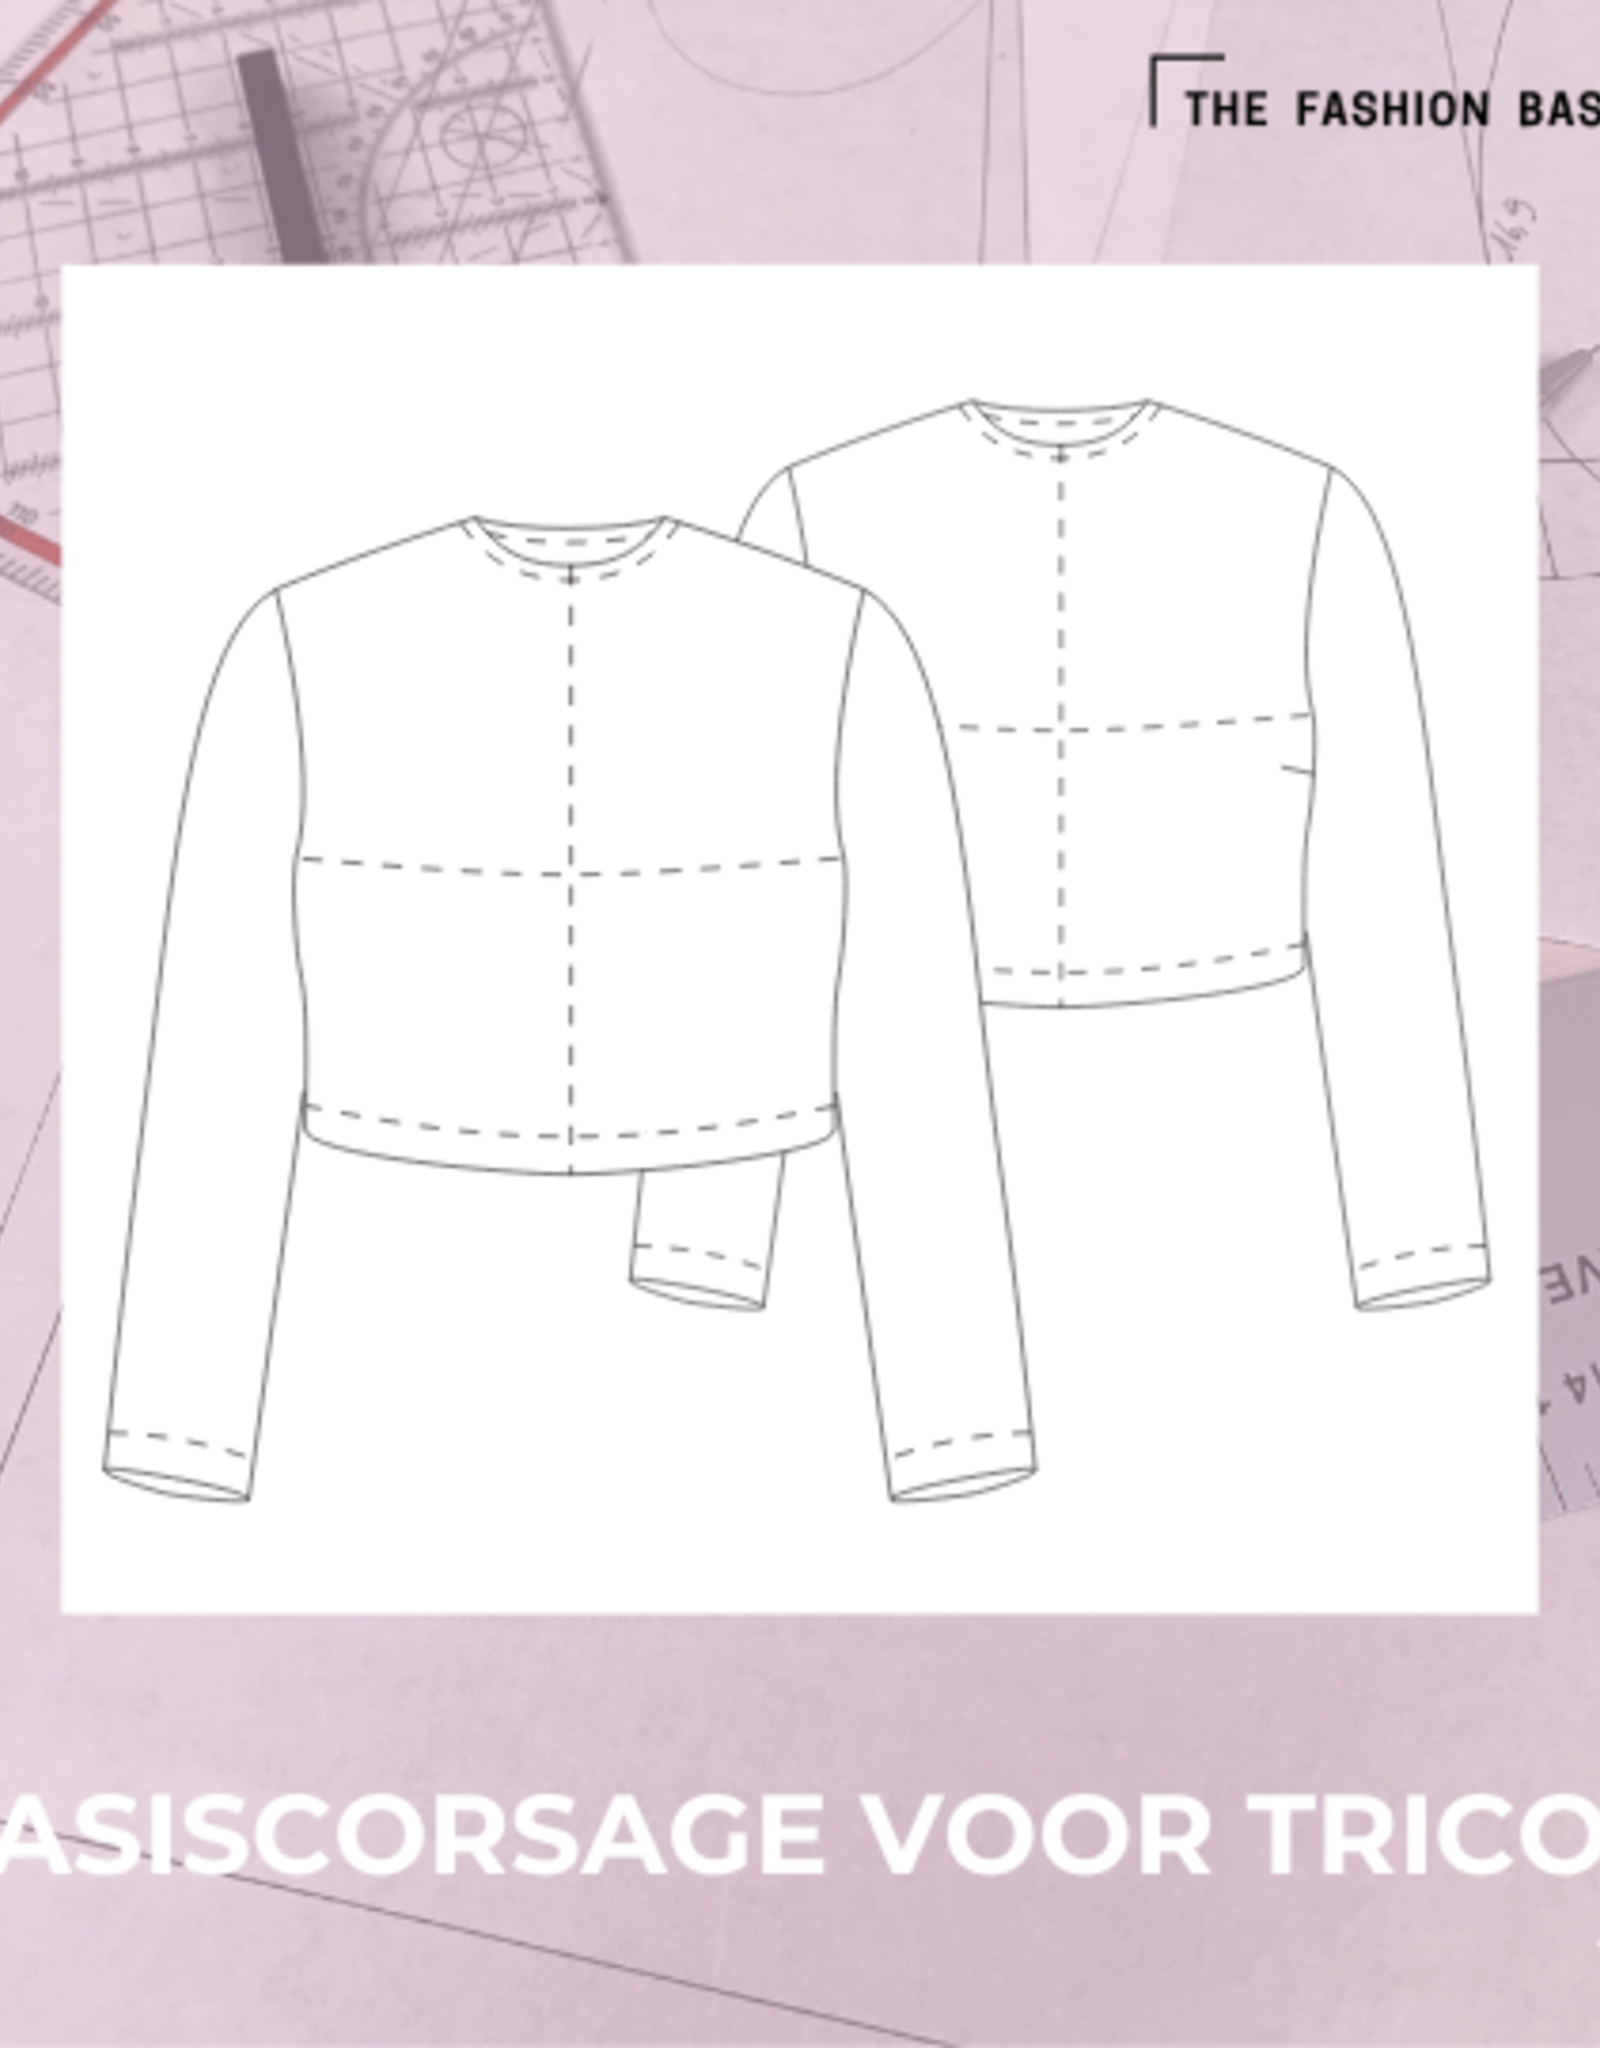 The Fashion Basement Basiscorsage  voor tricot 48-64